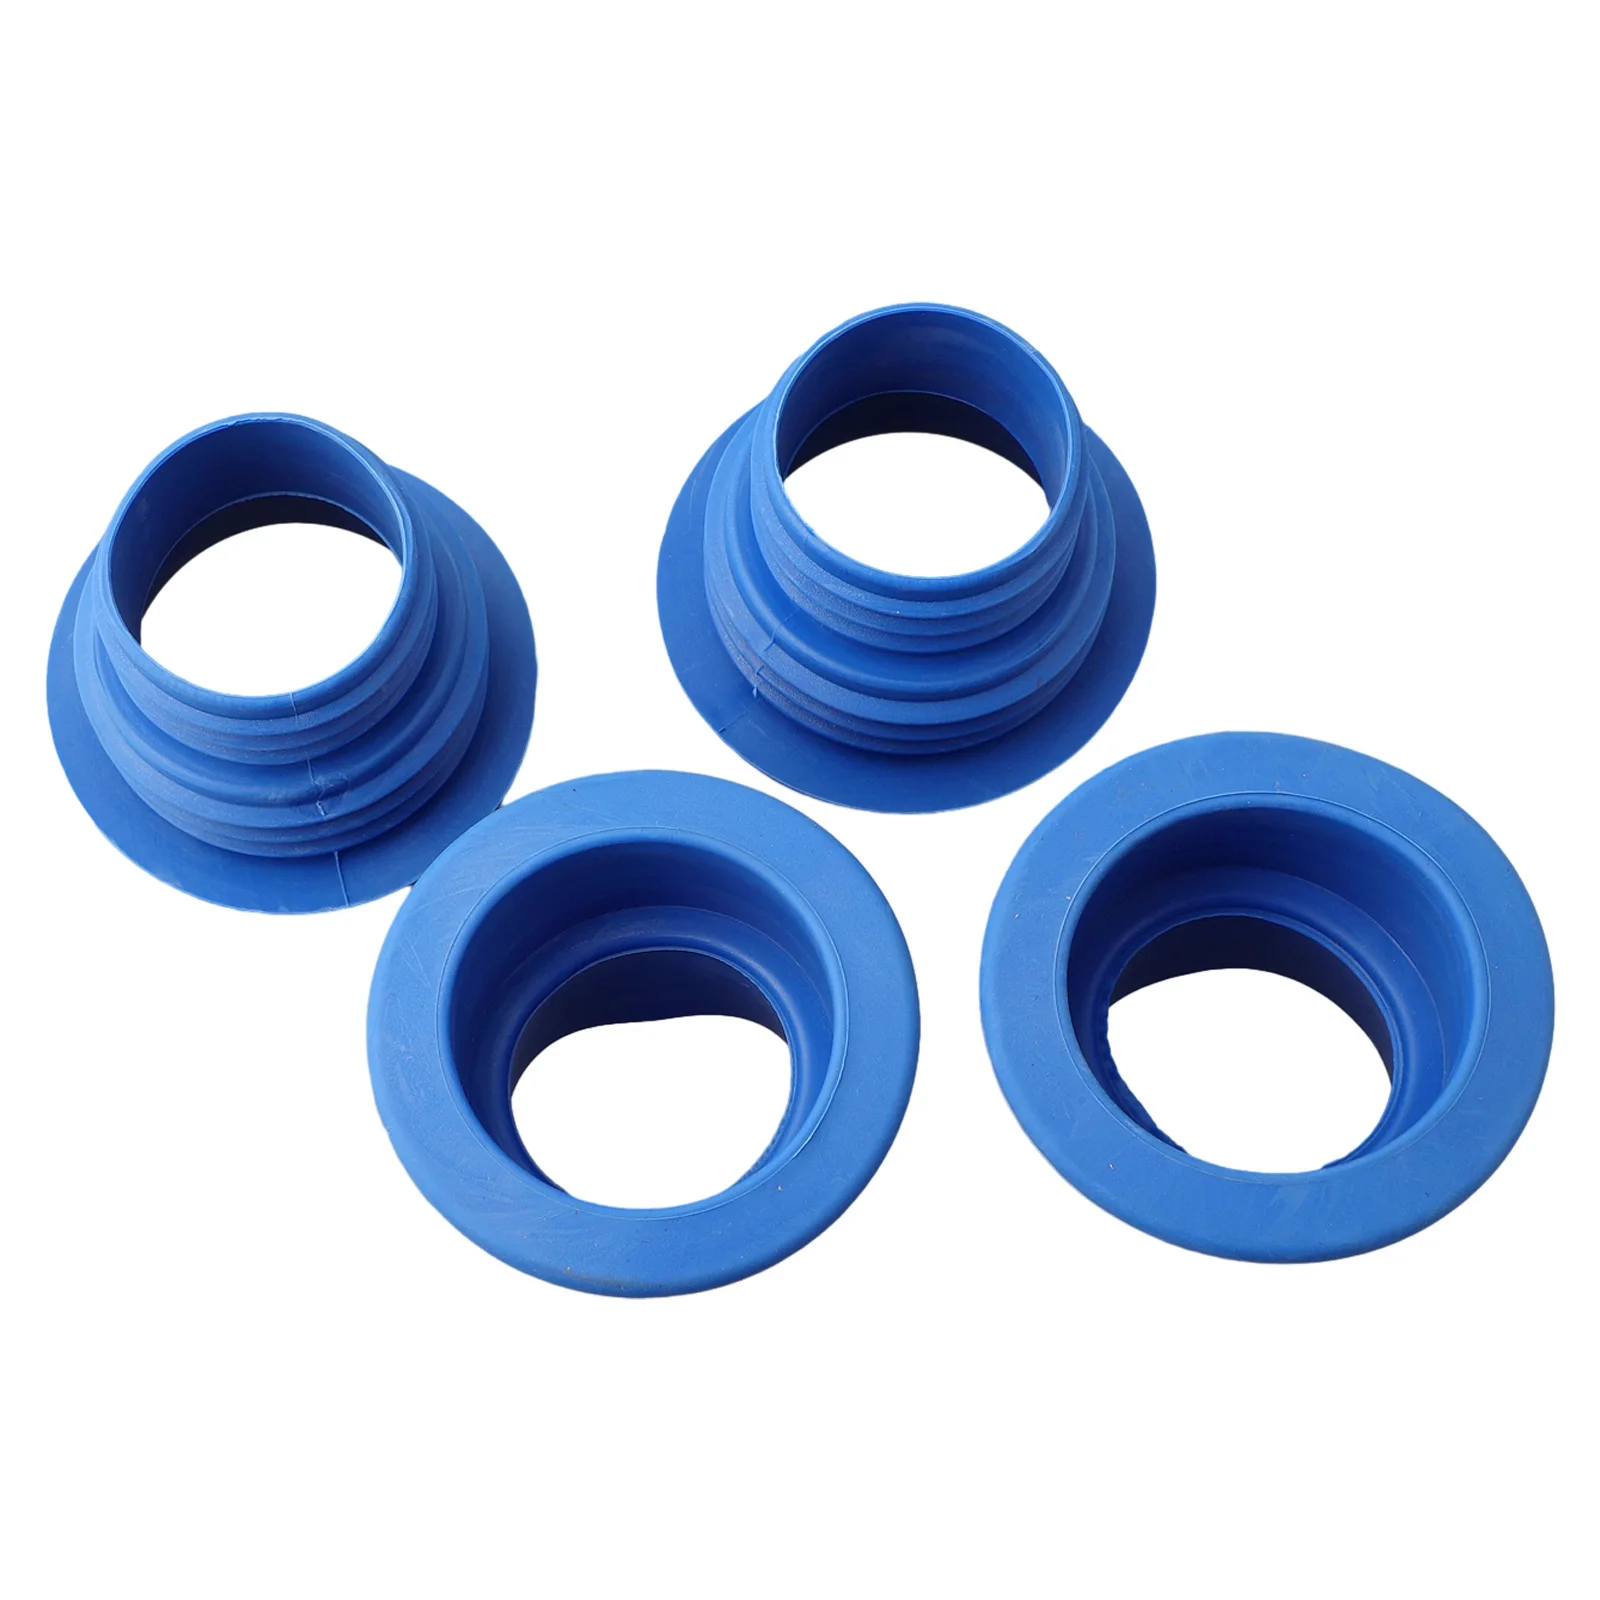 Ensure Proper Drainage with 4PCS Silicone Plug Sewer Seal Ring Application for Washing Machine Water Tank and Floor Leakage